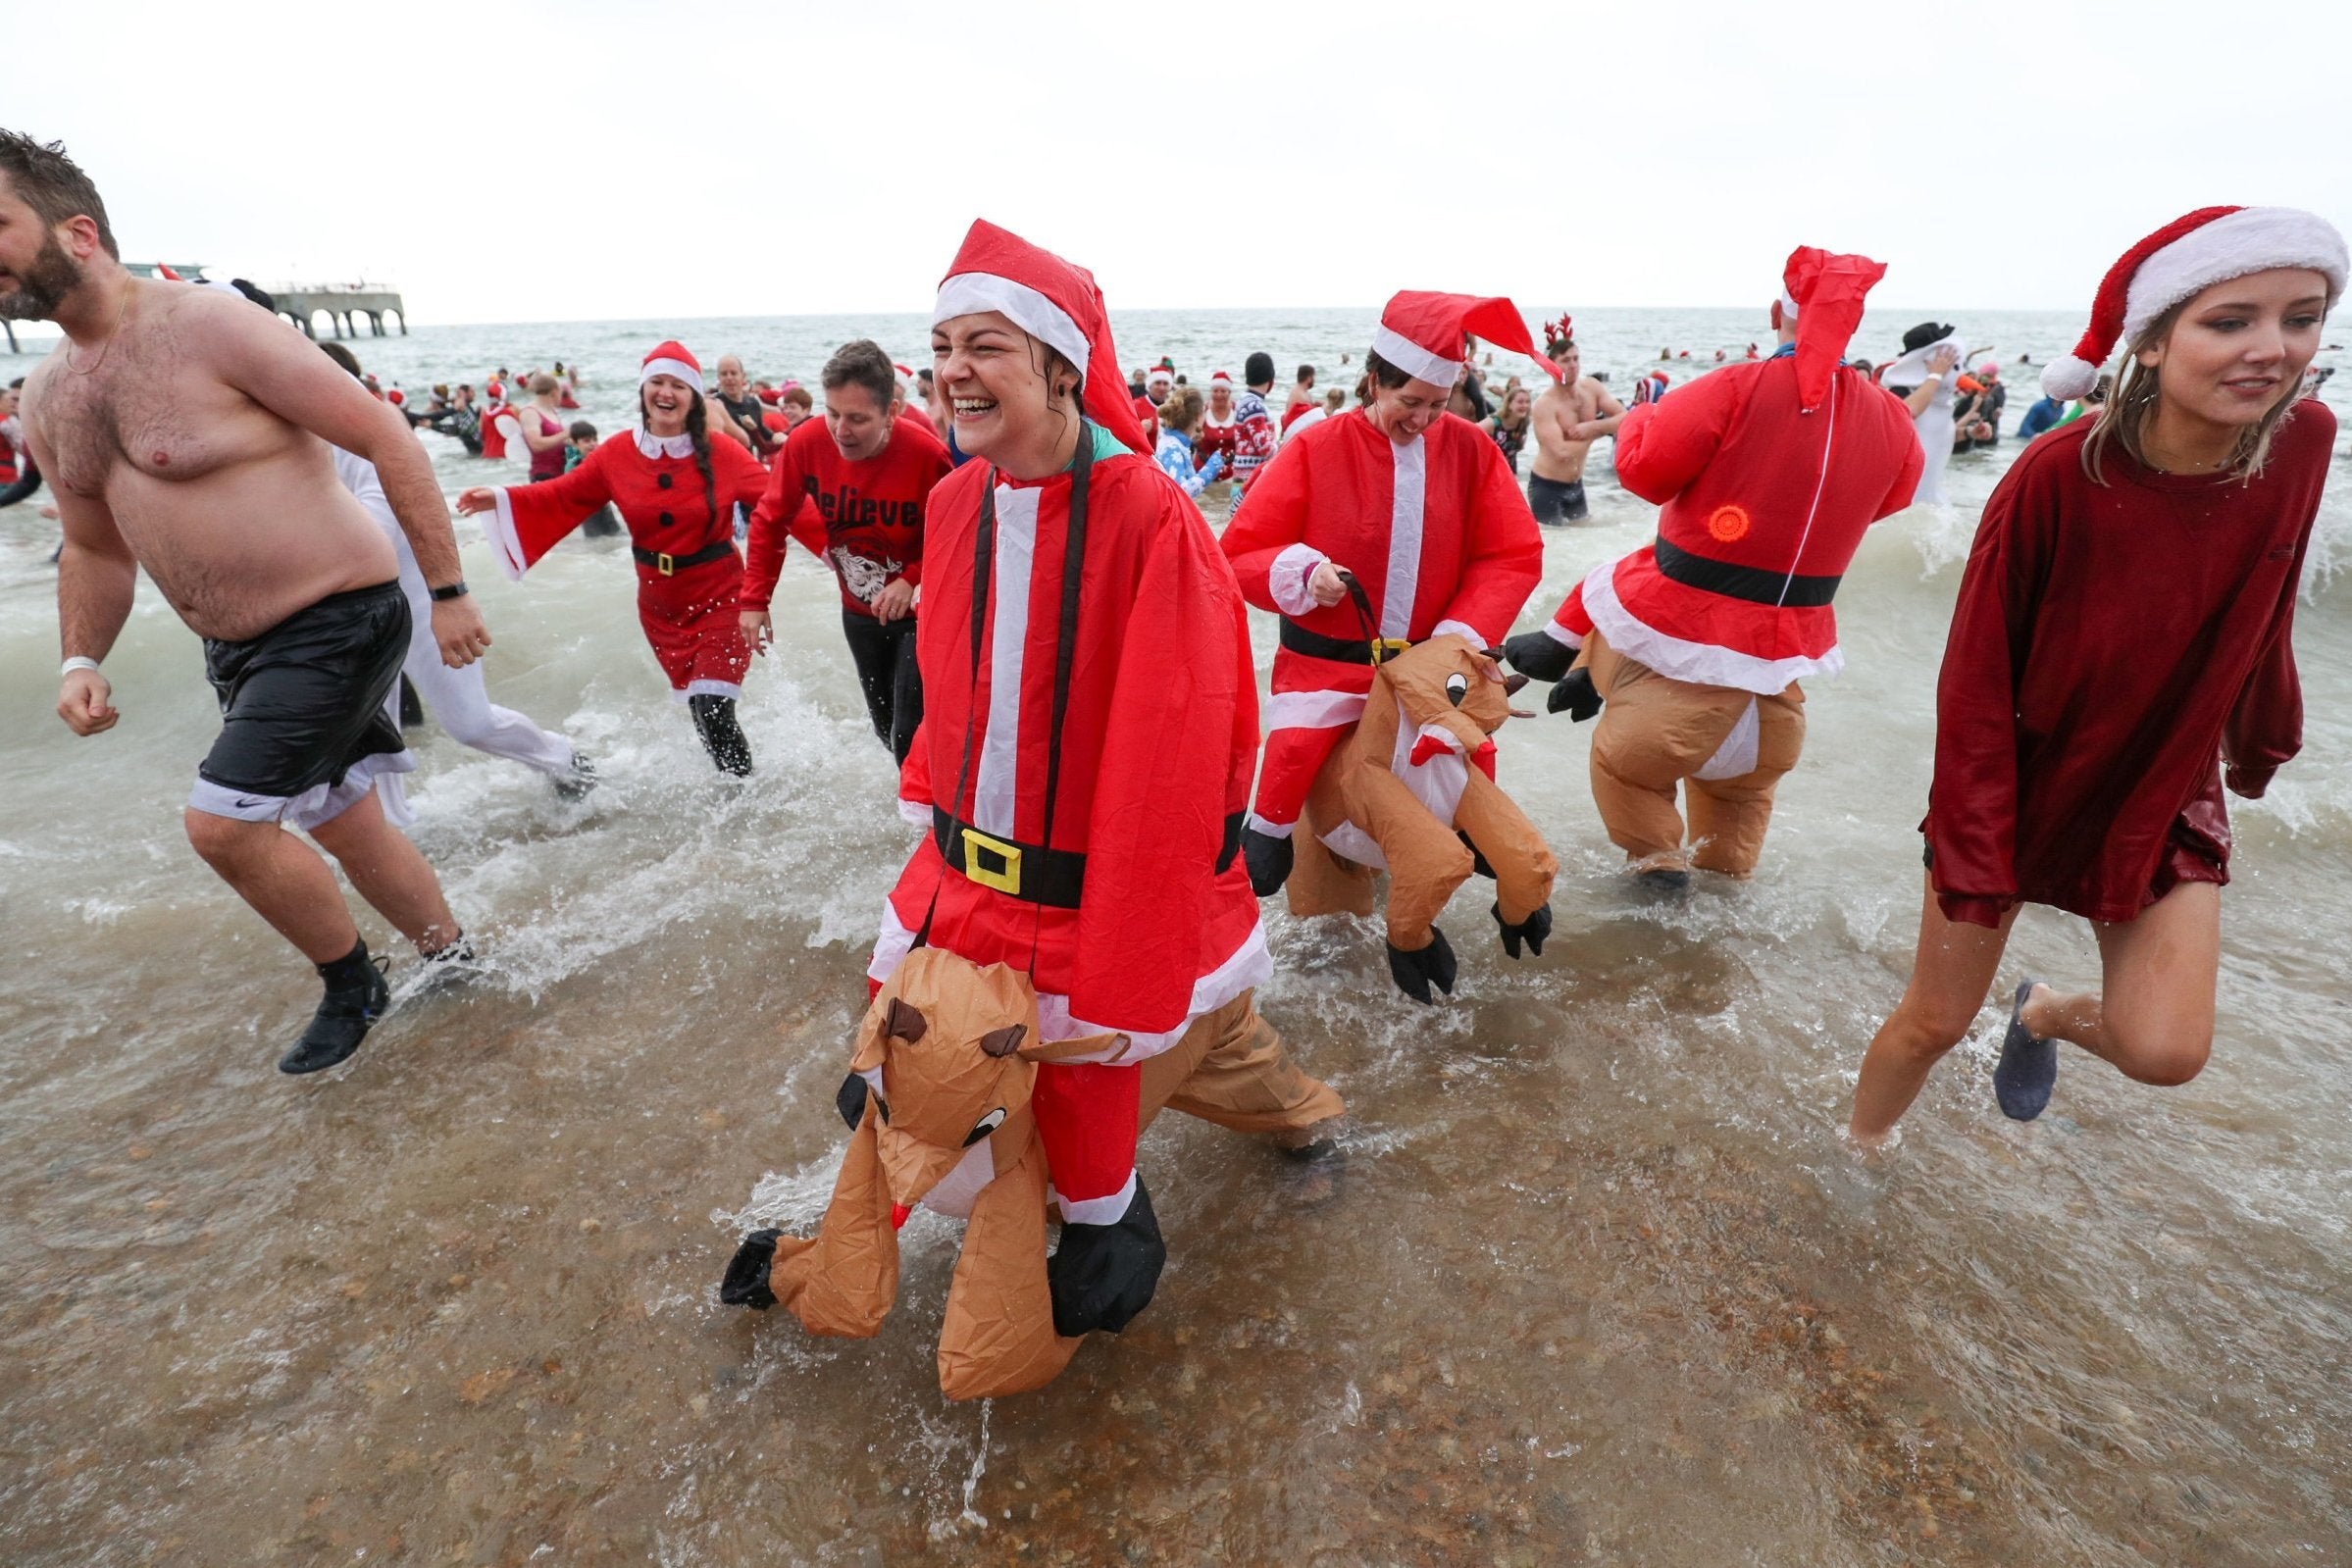 Swimmers dressed in full Santa Claus outfits for the annual swim at?Boscombe Pier in Bournemouth(PA)